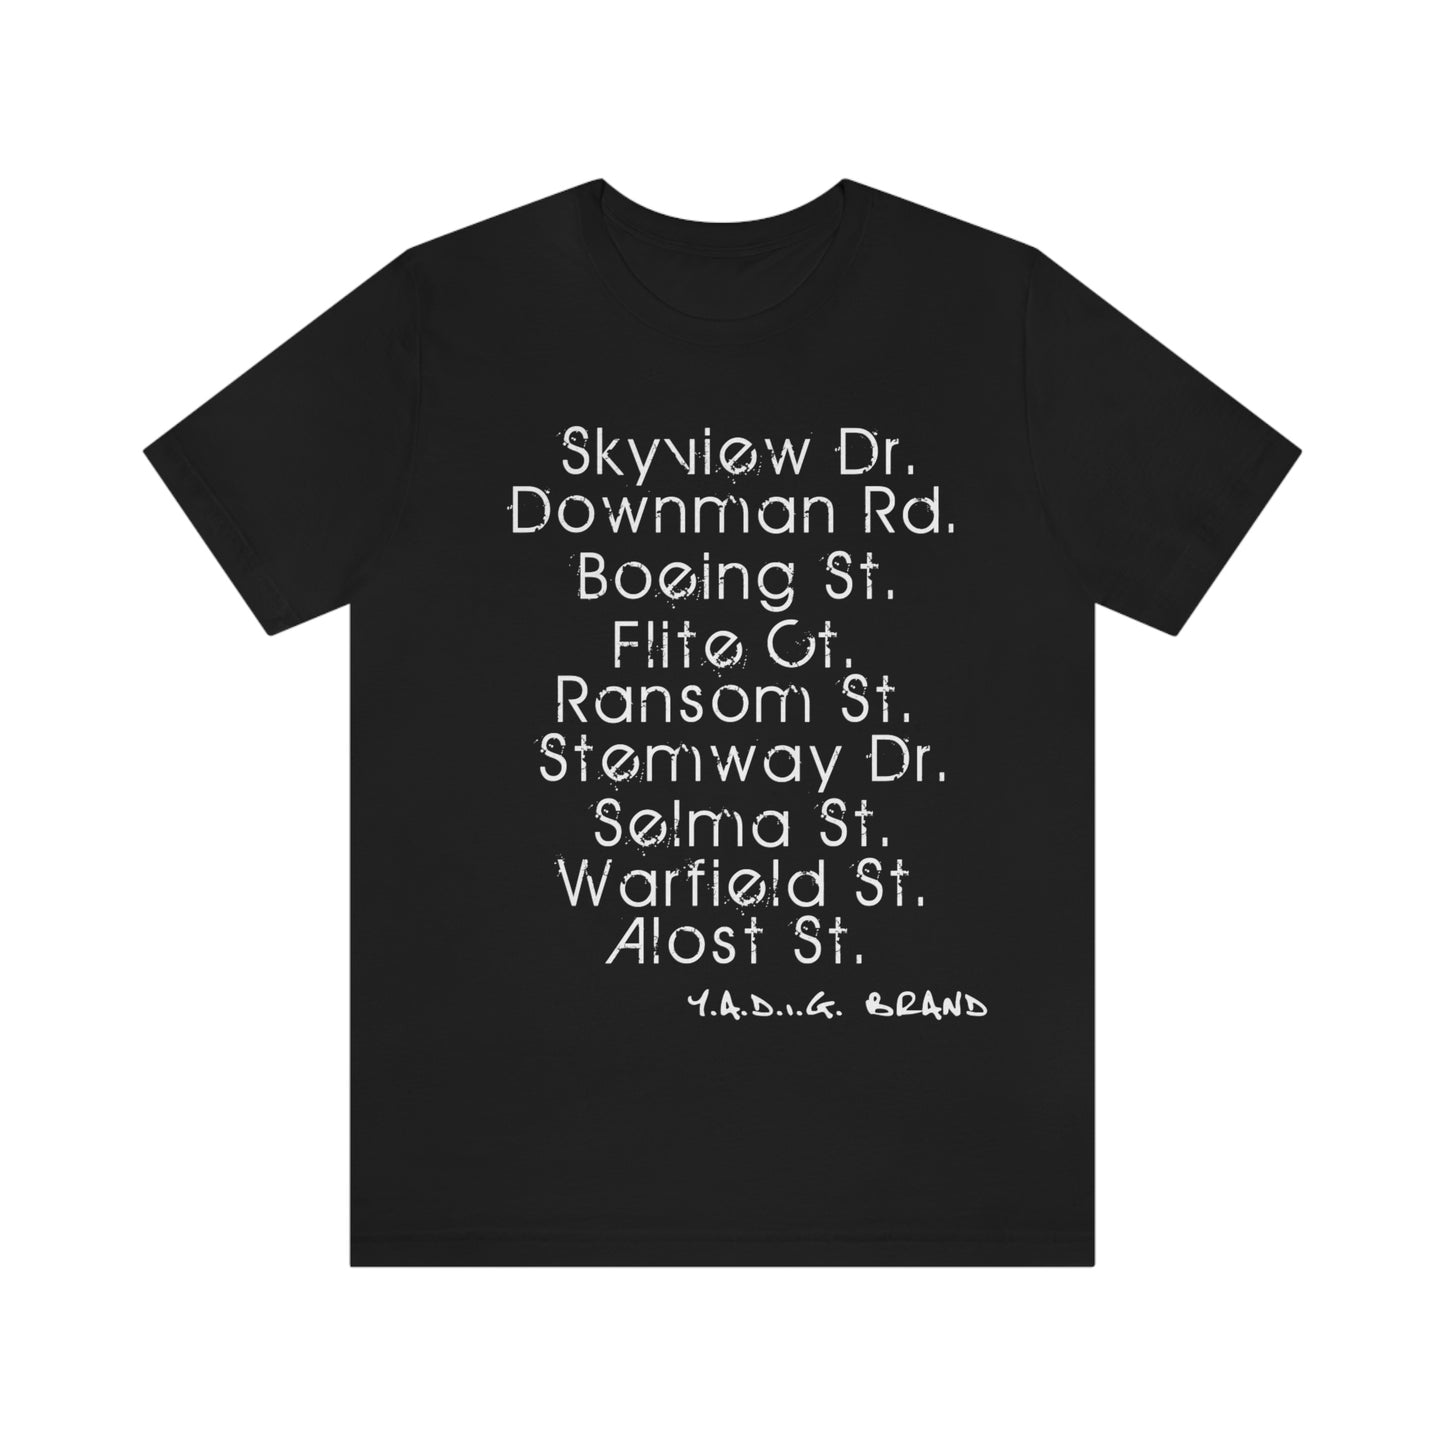 Skyview 2nd Edition T-Shirt